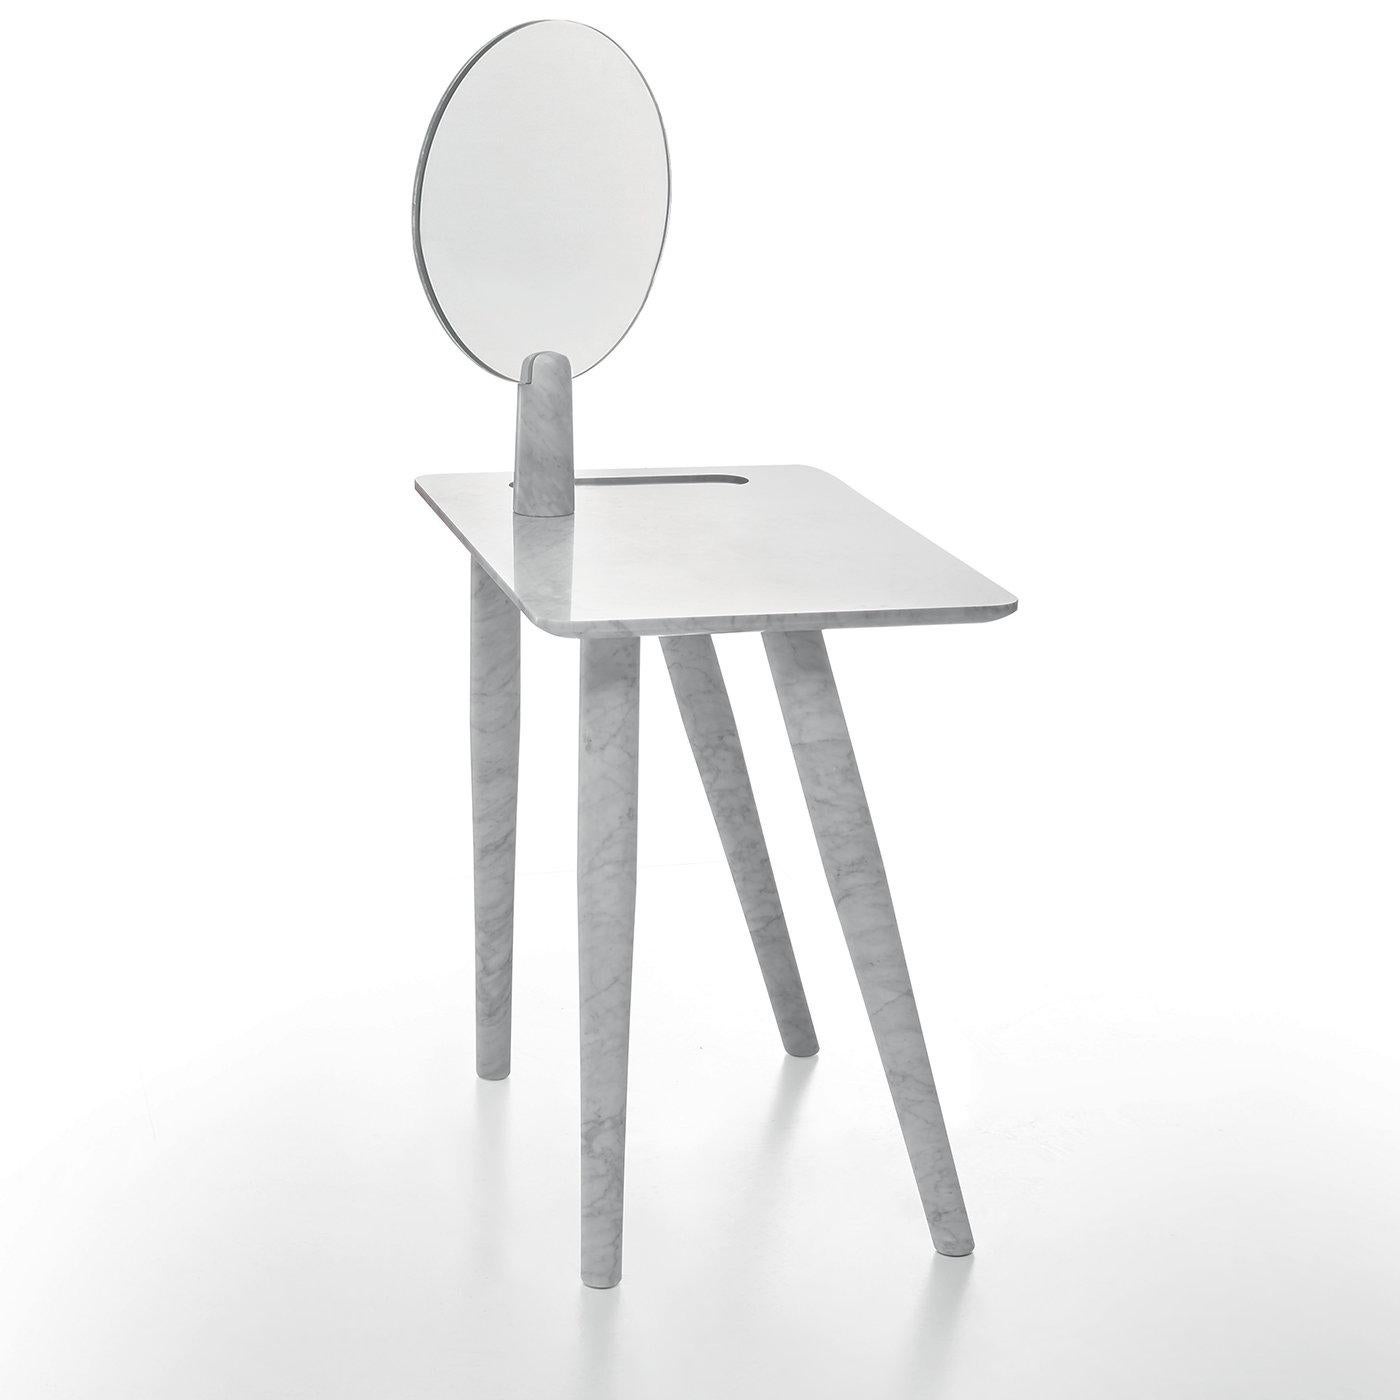 Desk / dressing table with detachable mirror and grooves to contain cosmetics. Available in white Carrara marble, black Marquina marble and on request in other types of stones.